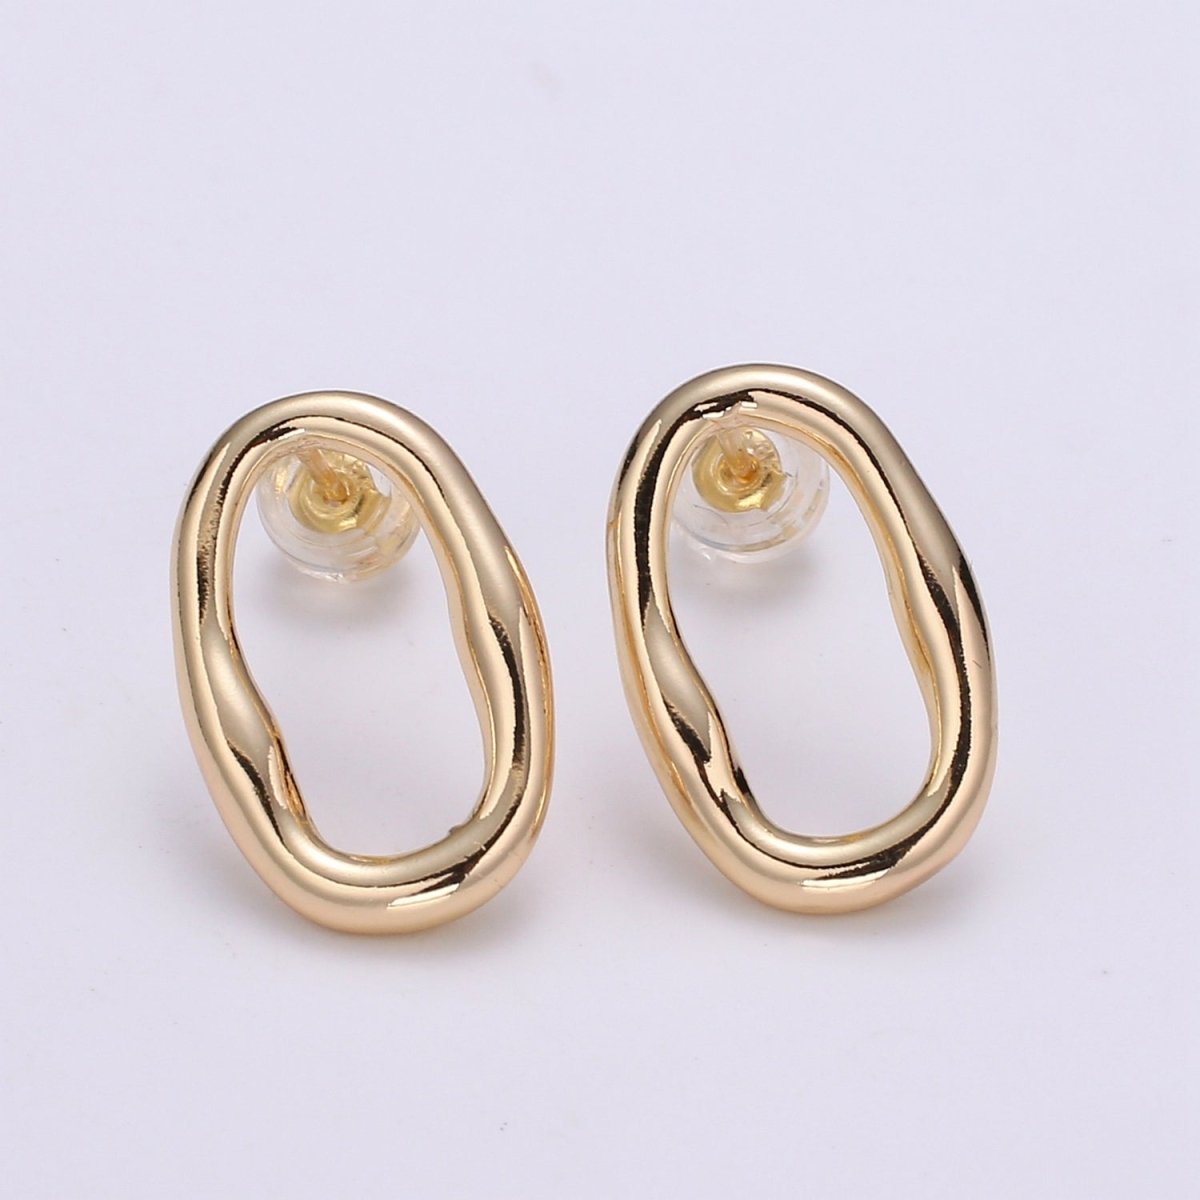 Ellips Design 18K Gold Stud Earring, Rose Gold Round for DIY Earring Craft Supply Jewelry Making Q-454 - DLUXCA